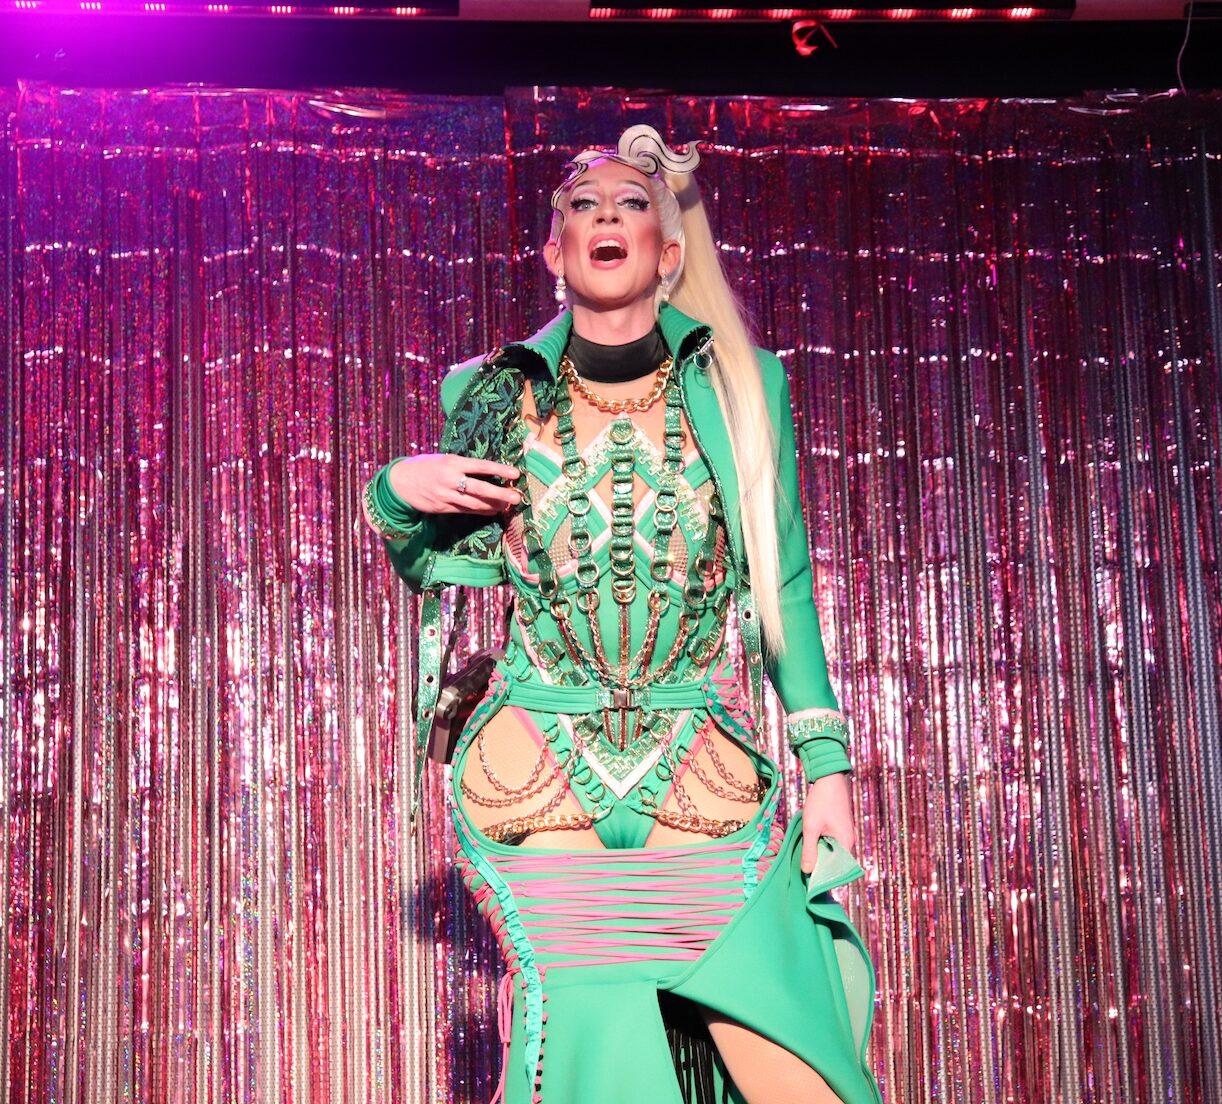 Photo of Drag queen Missshell performing her second set of the night at the drag show.